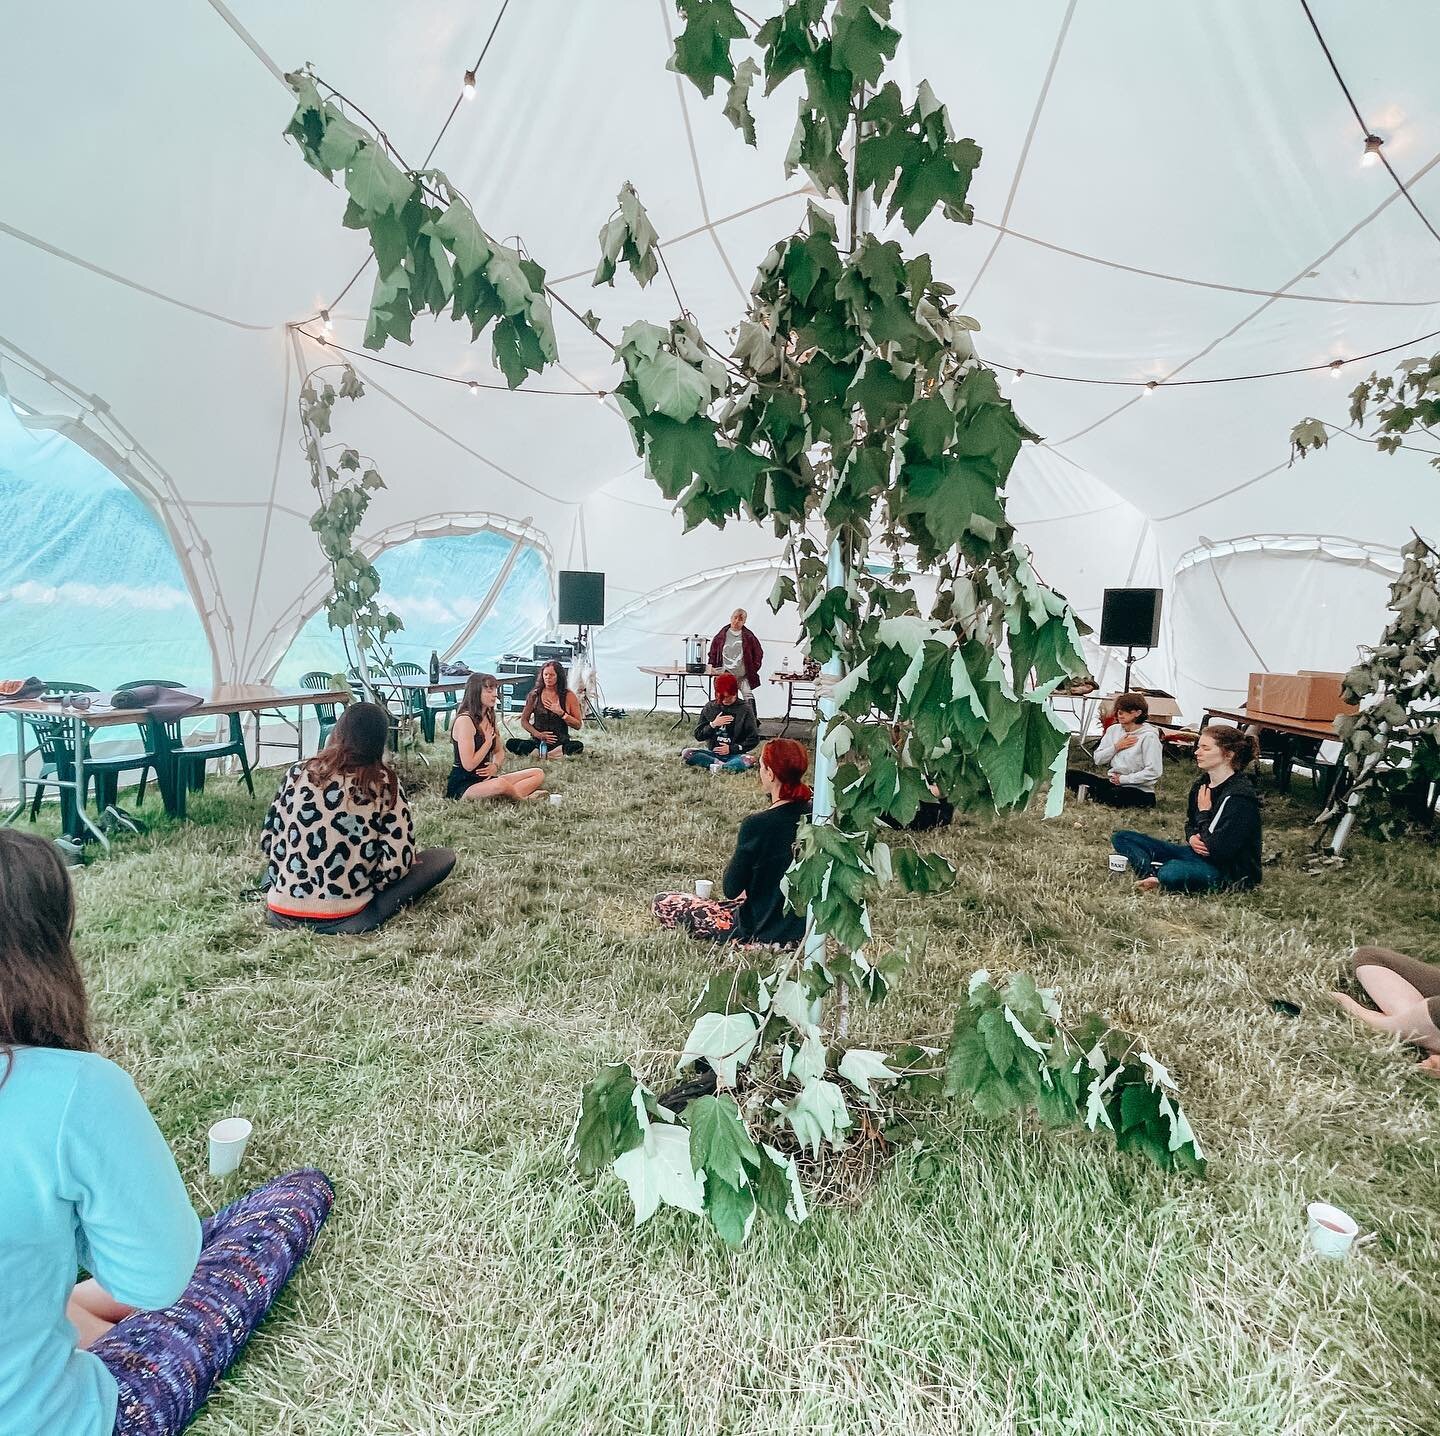 Spent this weekend at @alsofestival hosting Movement Medicine + Rasa Tea Ceremonies. 
 ⠀⠀⠀⠀⠀⠀⠀⠀⠀⠀⠀⠀
It was such a pleasure to be a part of it and it felt sooo special to be able to gather with others to laugh, dance, rest and of course, drink chocola